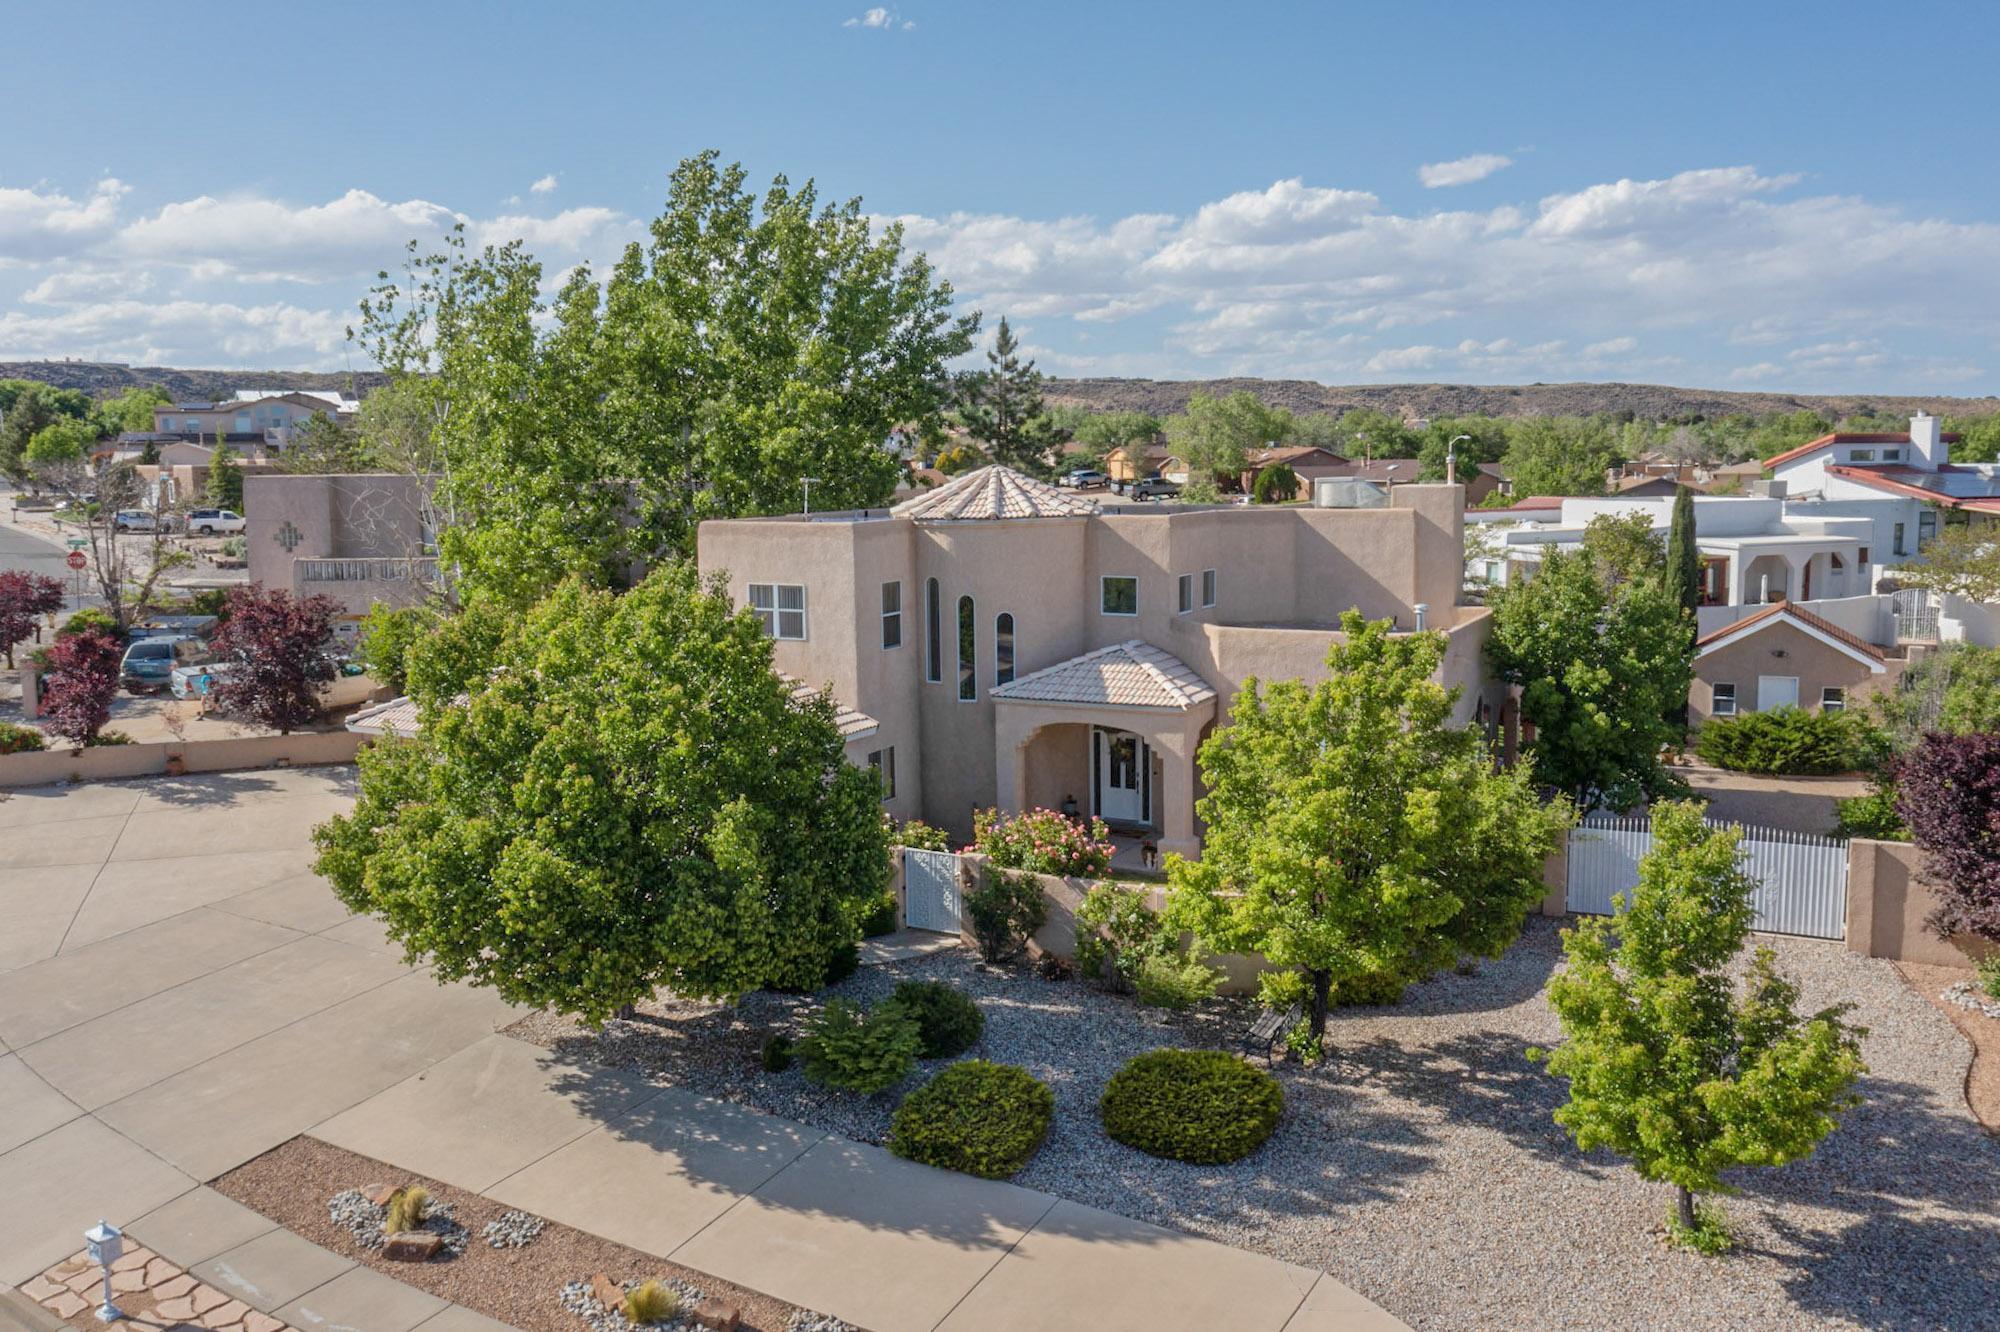 Gorgeous Custom Home nestled on a Huge Lot. This 2,953 square foot Home features 5 Bedrooms & 3 Full Baths with Granite Countertops. The Primary Suite includes a Deck with Impressive Sandia Mountain & City Views, an Ensuite with a Double Vanity, a Jetted Tub, and a Large Walk-in Closet. The Elegant Kitchen showcases Custom Cabinets, Granite Countertops, a Pantry, Stainless Steel Appliances & Double Ovens. Exceptional Features Throughout include Custom Curved Staircase, Medallion Ceilings, Wood Domed Vaulted Ceiling, Deep Nichos with Lighting, Beautiful Arches, Custom Tilework, an Abundance of Storage, Multiple Outdoor Living Areas, Off Street Parking for 12+ Vehicles & Backyard RV Access, and a Large Workshop or Potential Casita with Electricity. Close to scenic Petroglyph Hiking Trails.